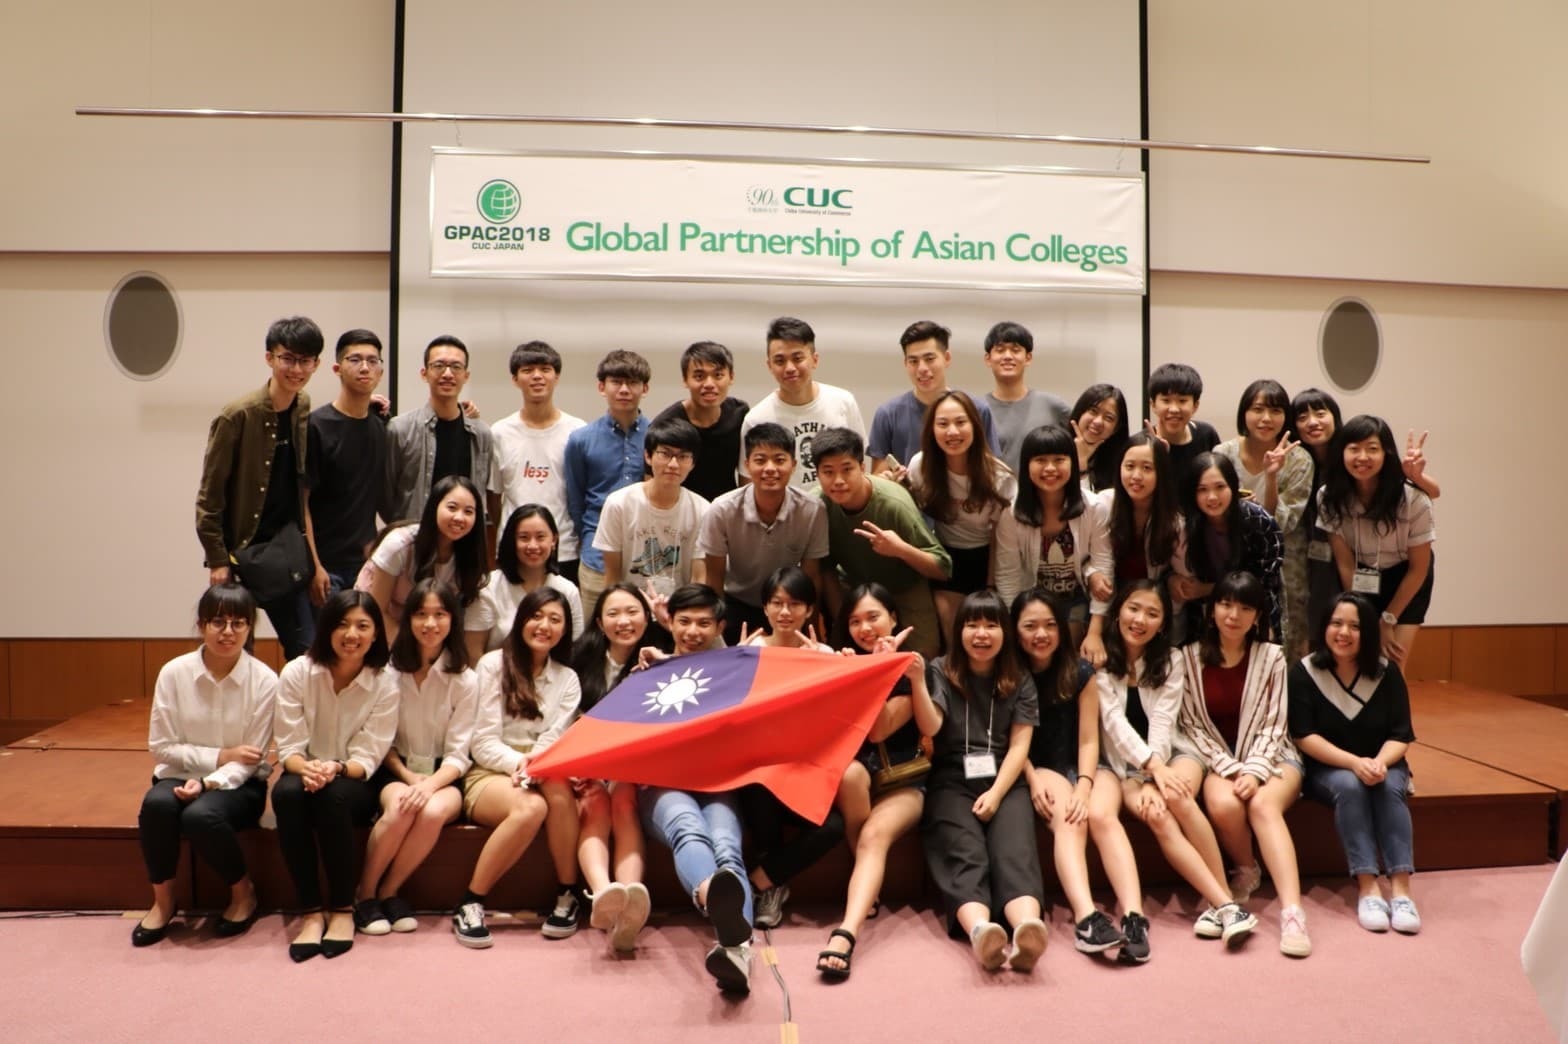 "Students participate the annual Global Partnership for Asian Colleges（GPAC), which comprises students from top universities in Taiwan, Japan , Vietnam and Korea. "